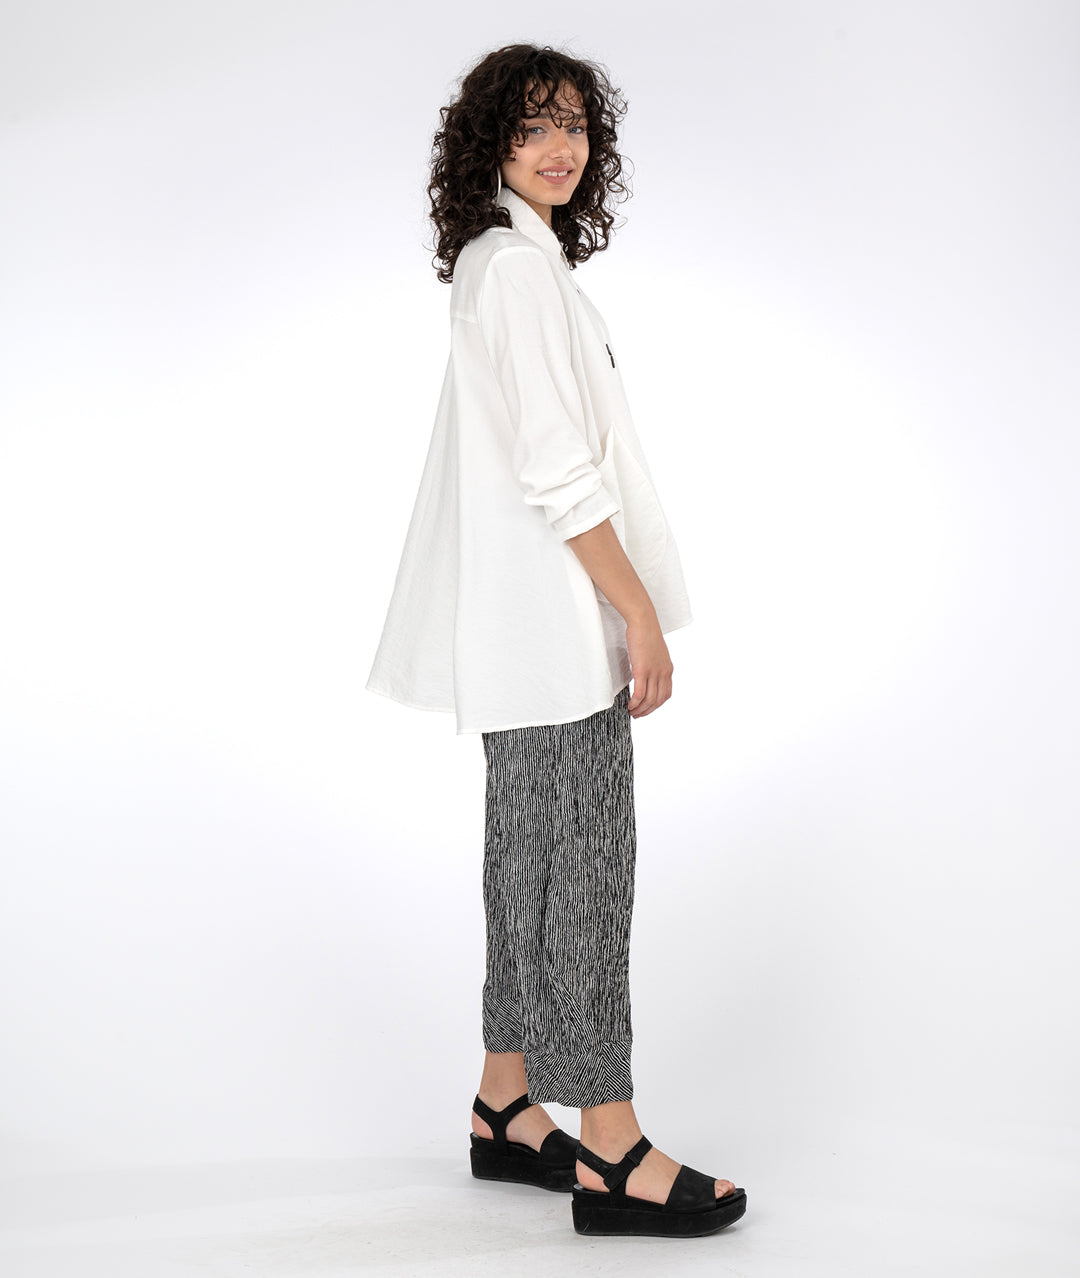 model in a black and white striped pant with a white blouse with a full flowy body and oversized pockets at the hips